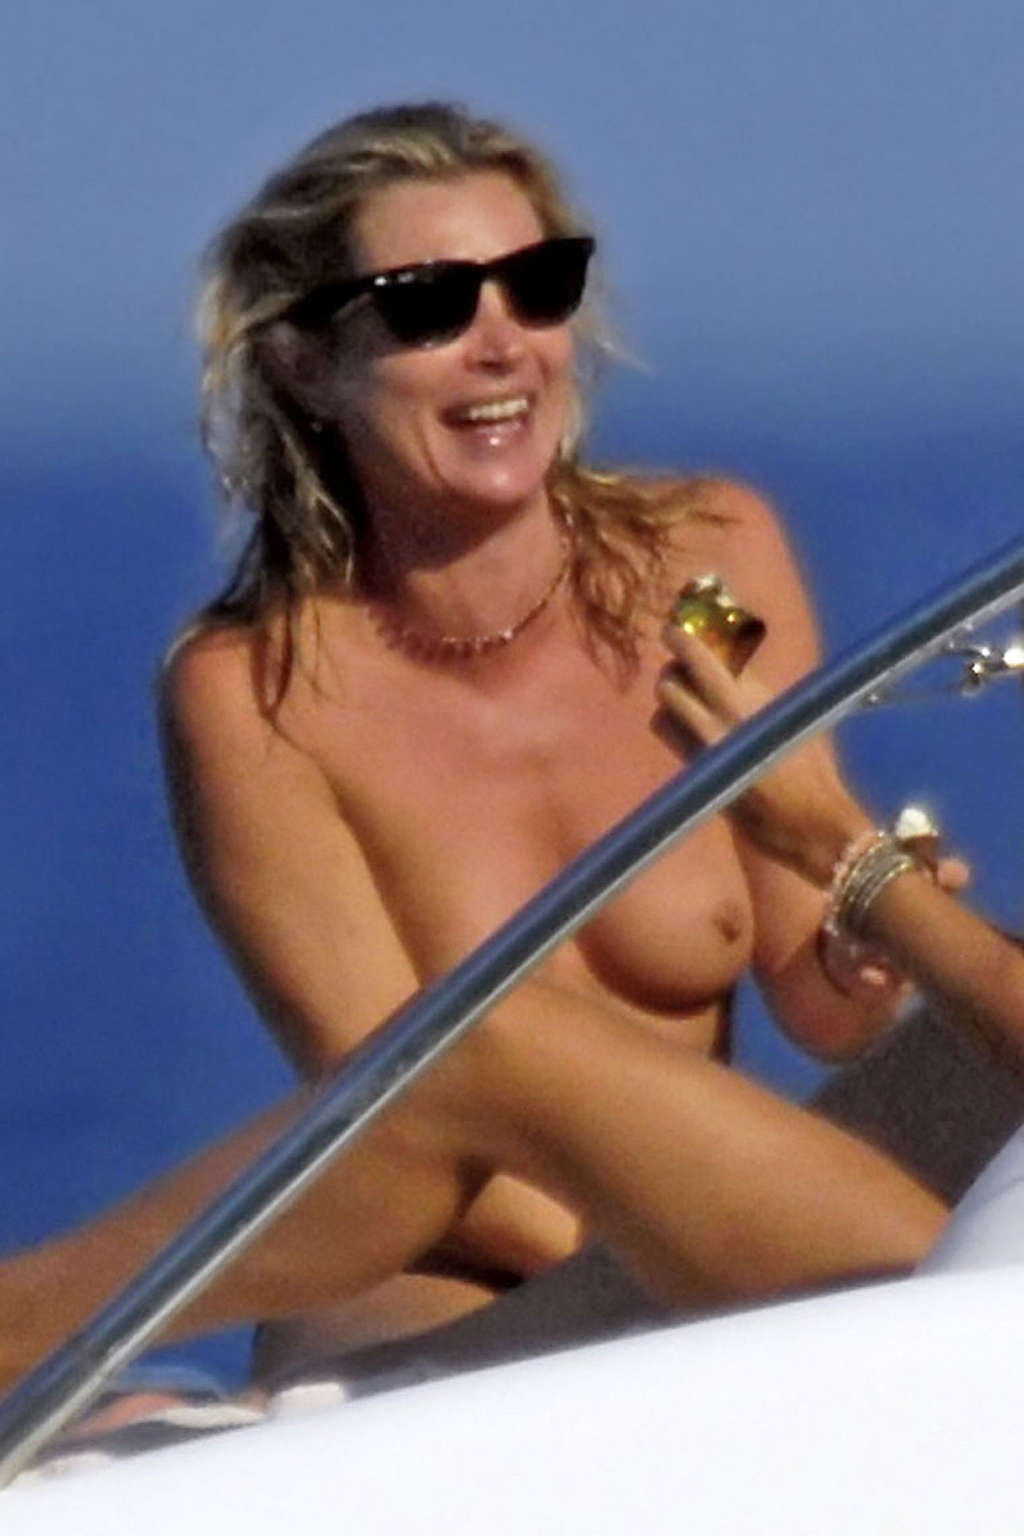 Kate Moss topless on yacht paparazzi pictures #75364316